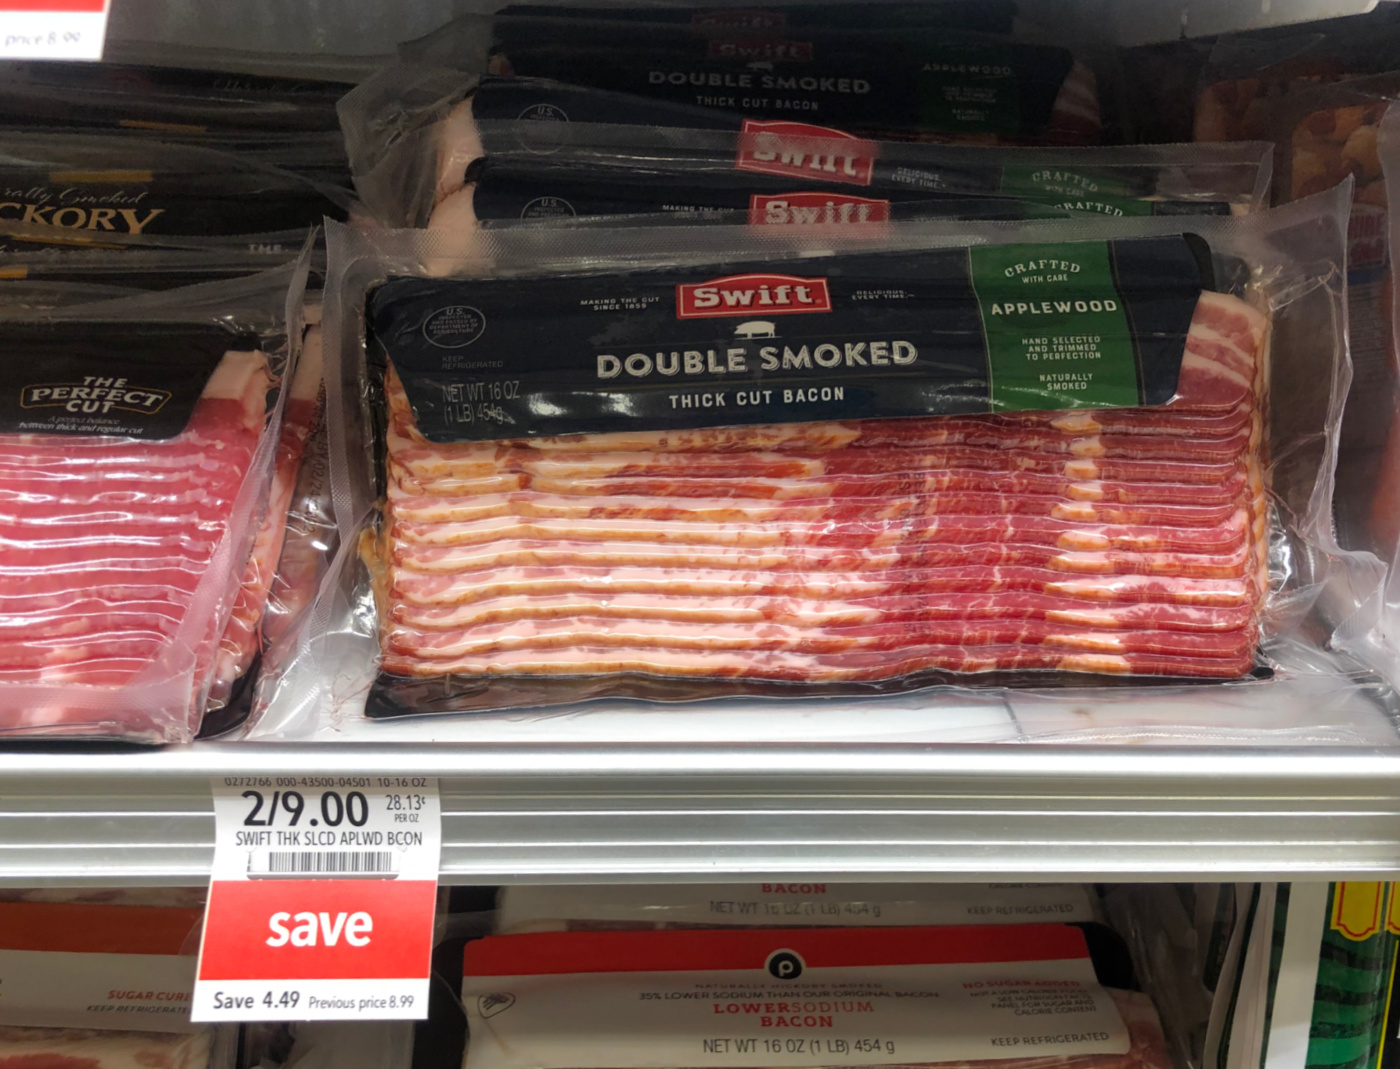 Swift Bacon Is Half Price Right Now At Publix on I Heart Publix